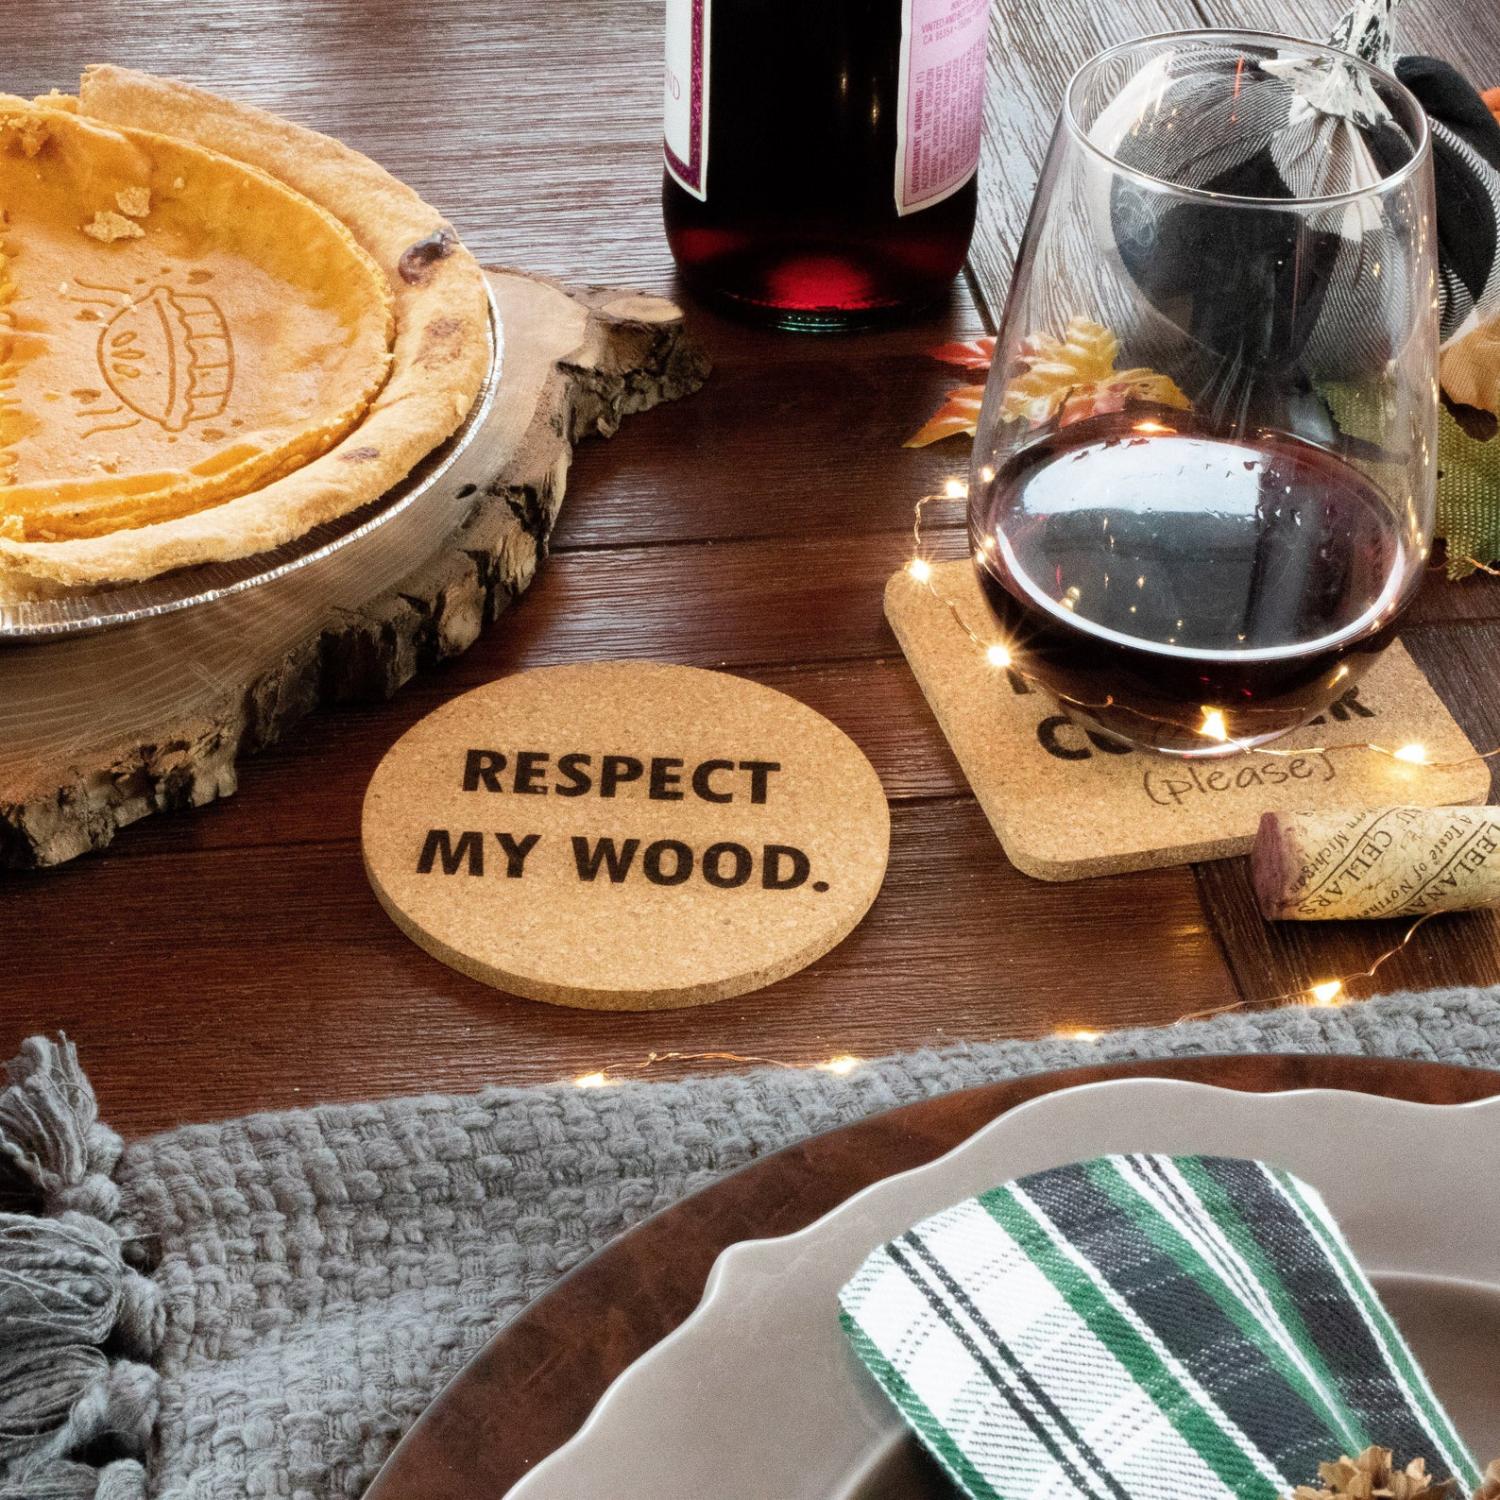 Respect my wood cork coaster  on a wooden table along with half pumpkin pie in a pie pan and a less than a half-filled wine glass on the table